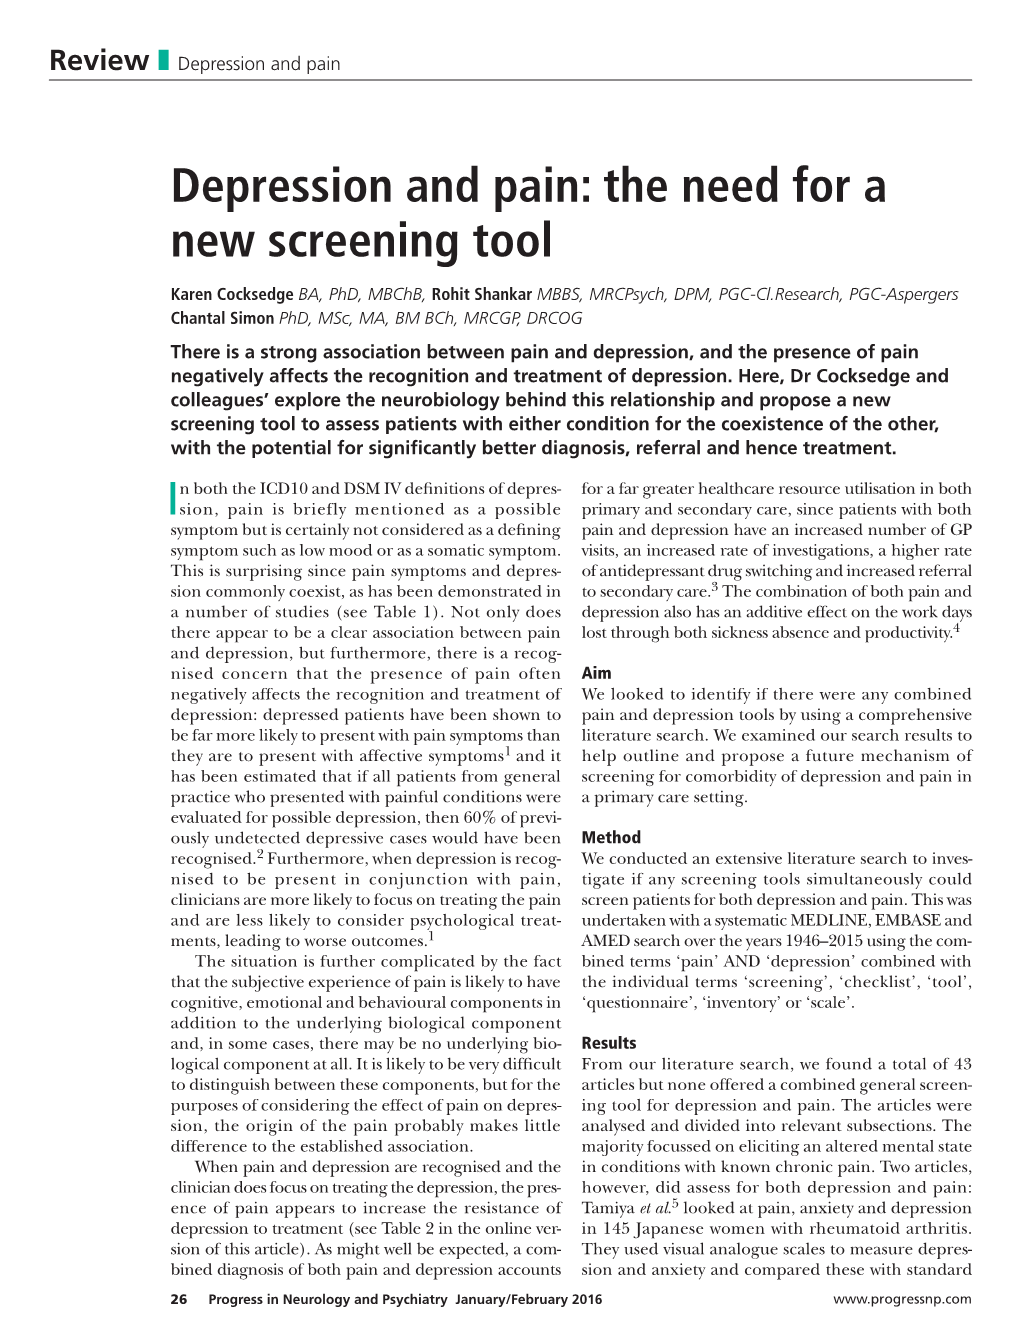 Depression and Pain: the Need for a New Screening Tool